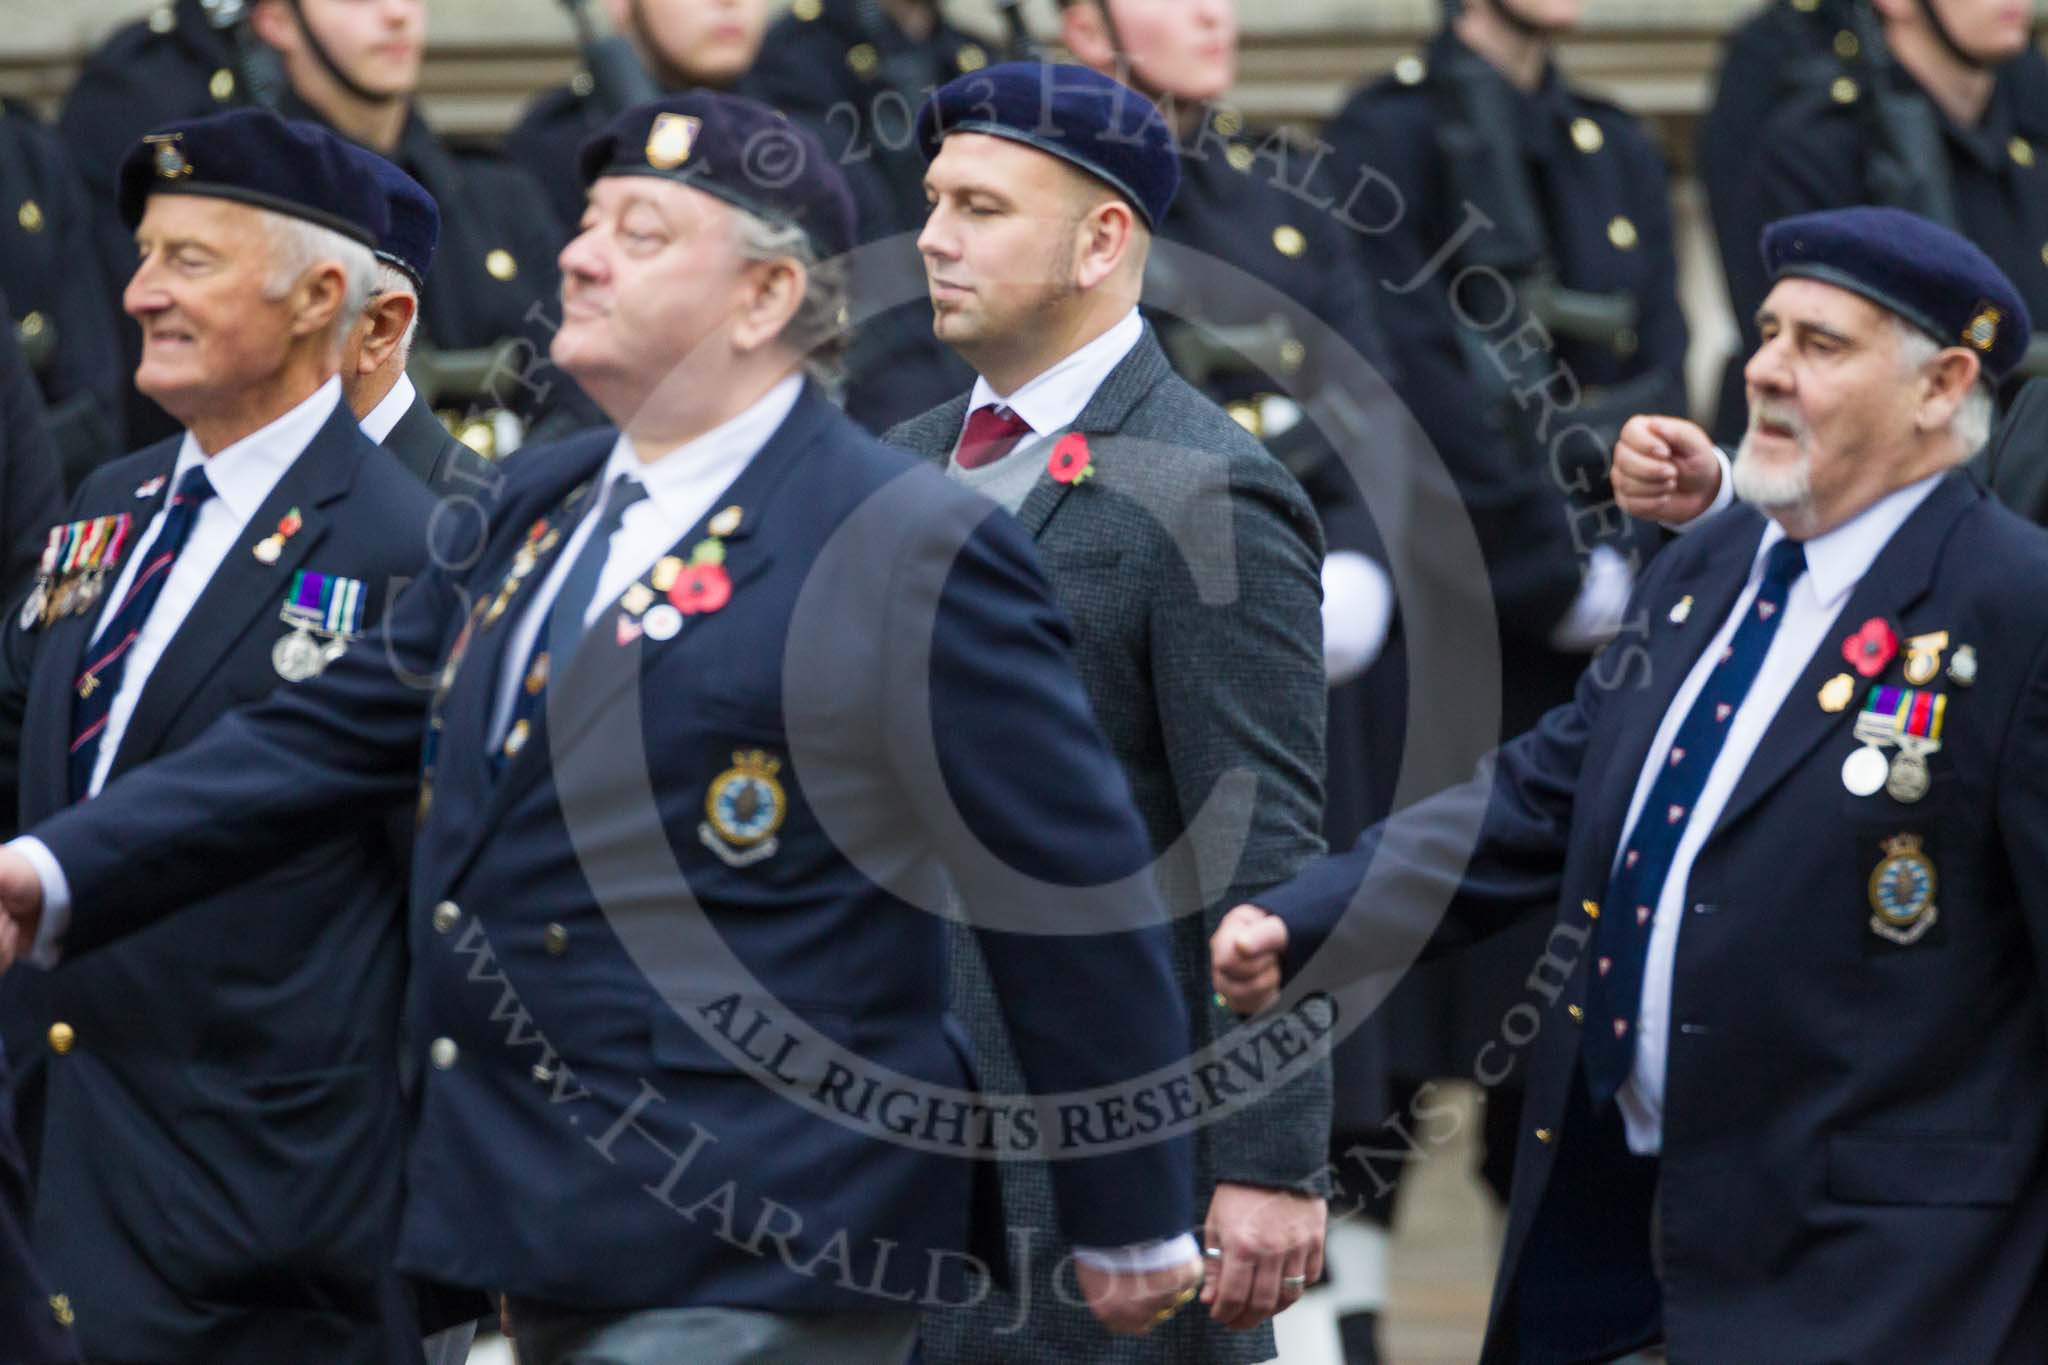 Remembrance Sunday at the Cenotaph 2015: Group E15, Ton Class Association.
Cenotaph, Whitehall, London SW1,
London,
Greater London,
United Kingdom,
on 08 November 2015 at 12:00, image #880